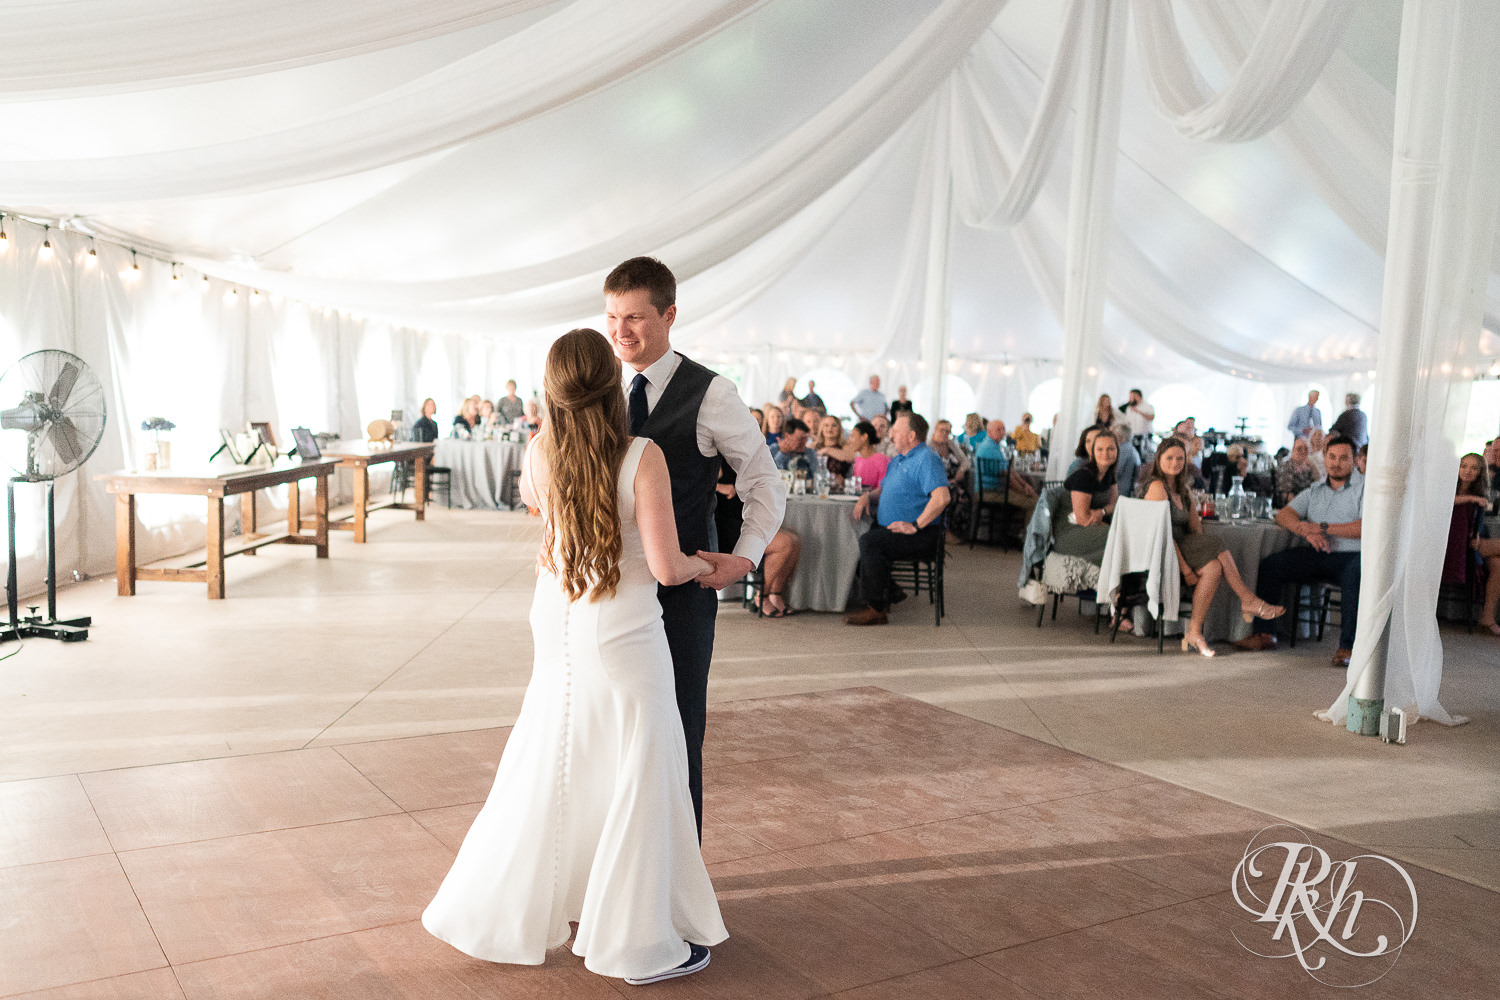 First dance at Stone Lion Winery and Events in Isanti, Minnesota. 